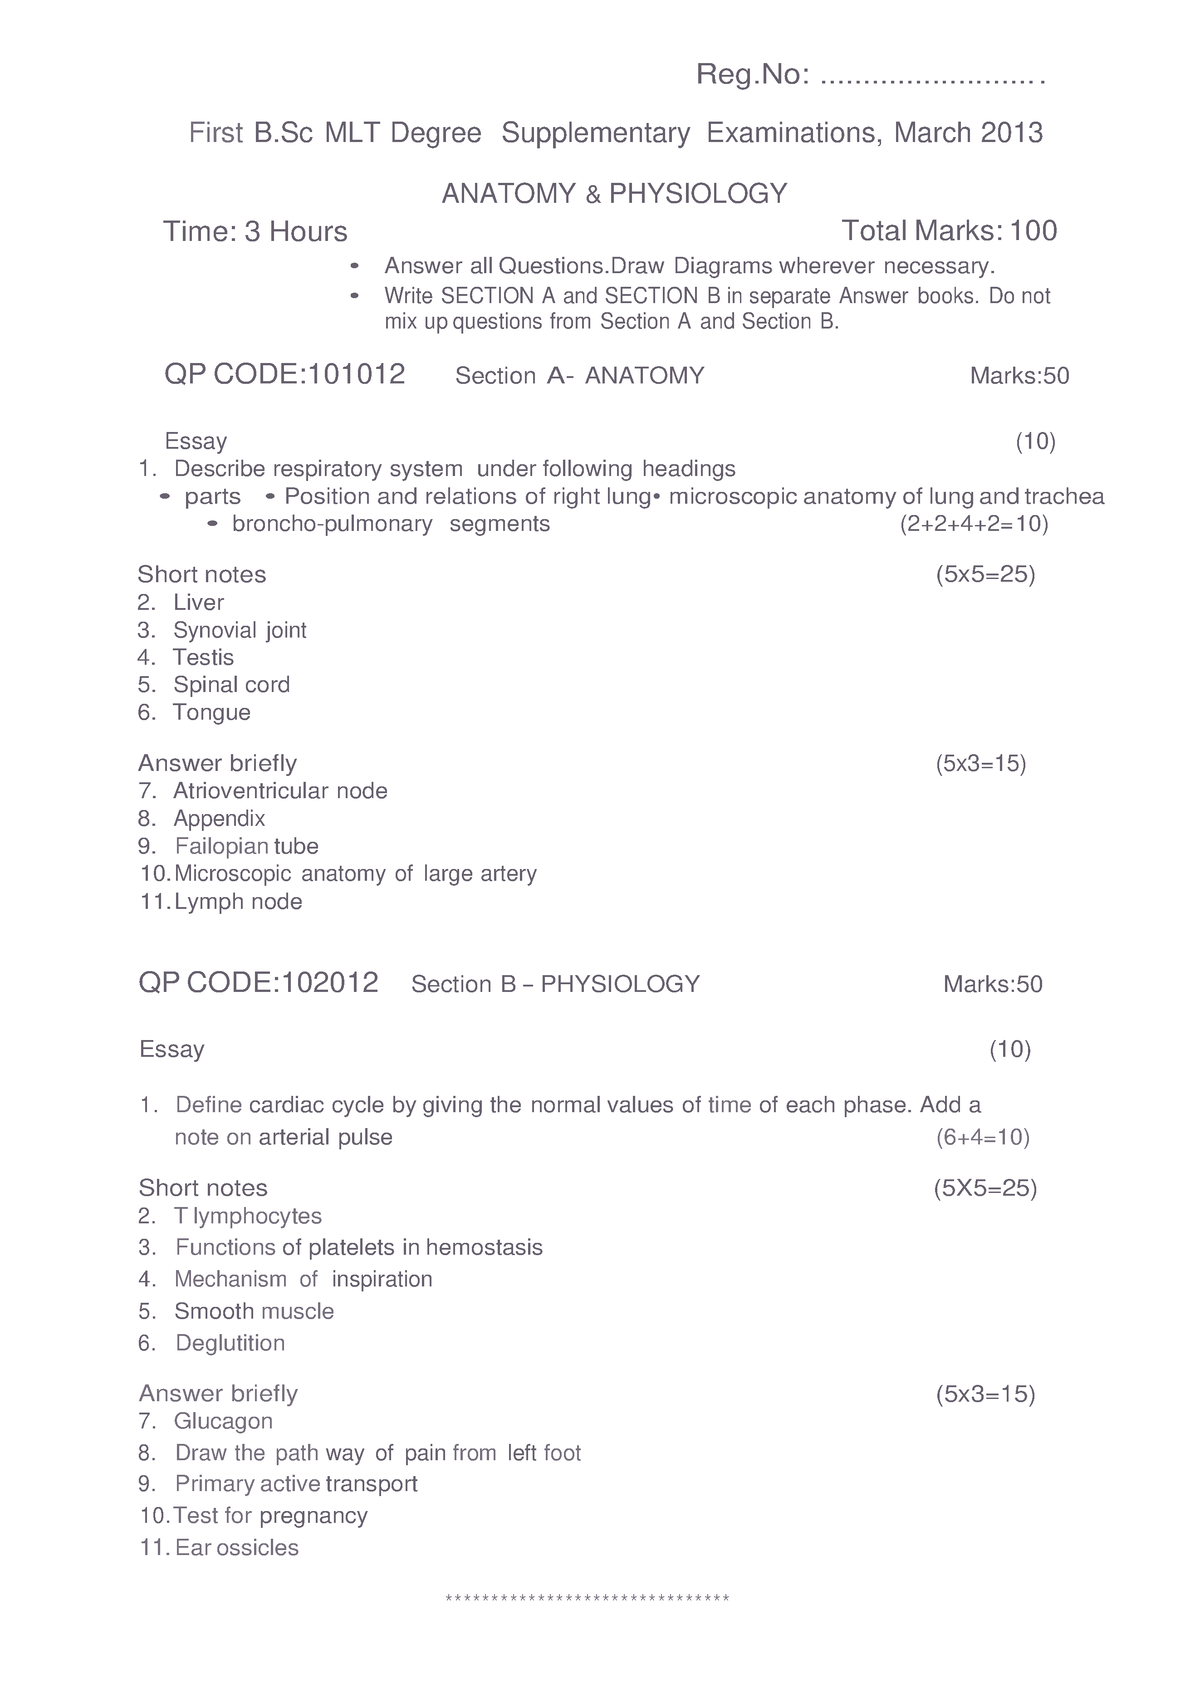 Kuhs first bsc mlt exam question paper march 2013 anatomy and